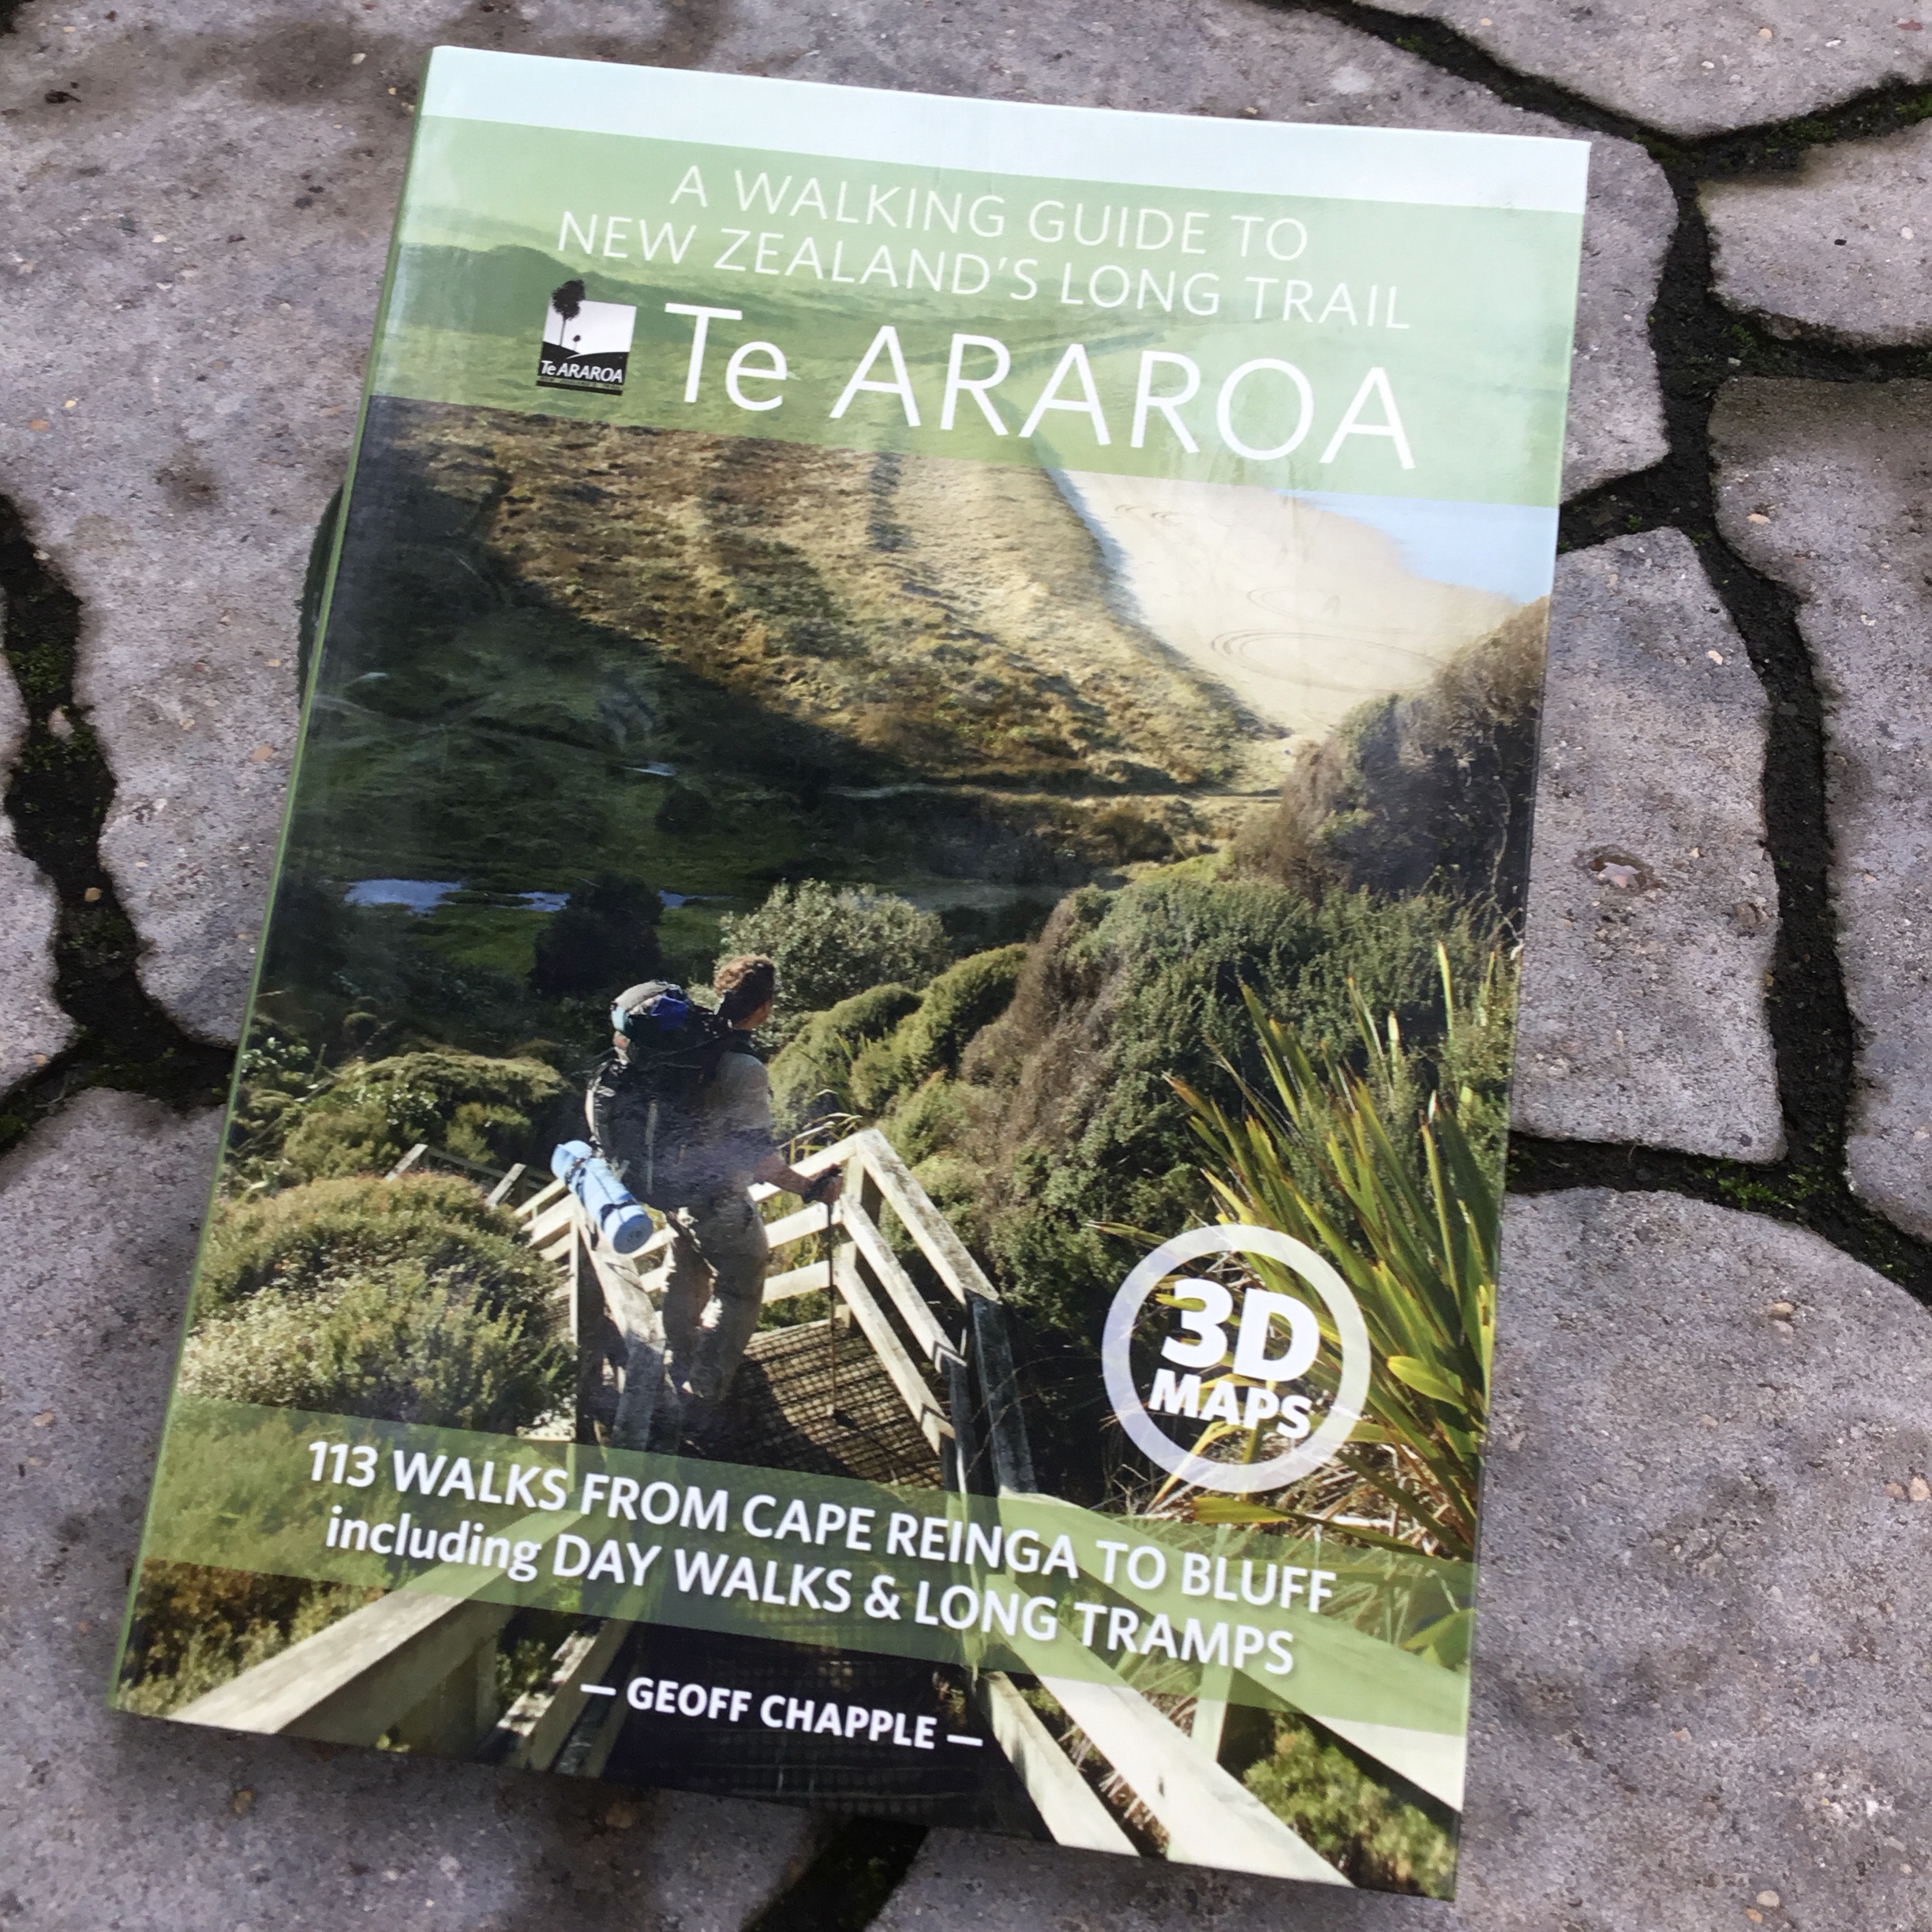 The Te Araroa means "long pathway" in Maori. Blissful Hiker Alison Young walked it in 2018-19.